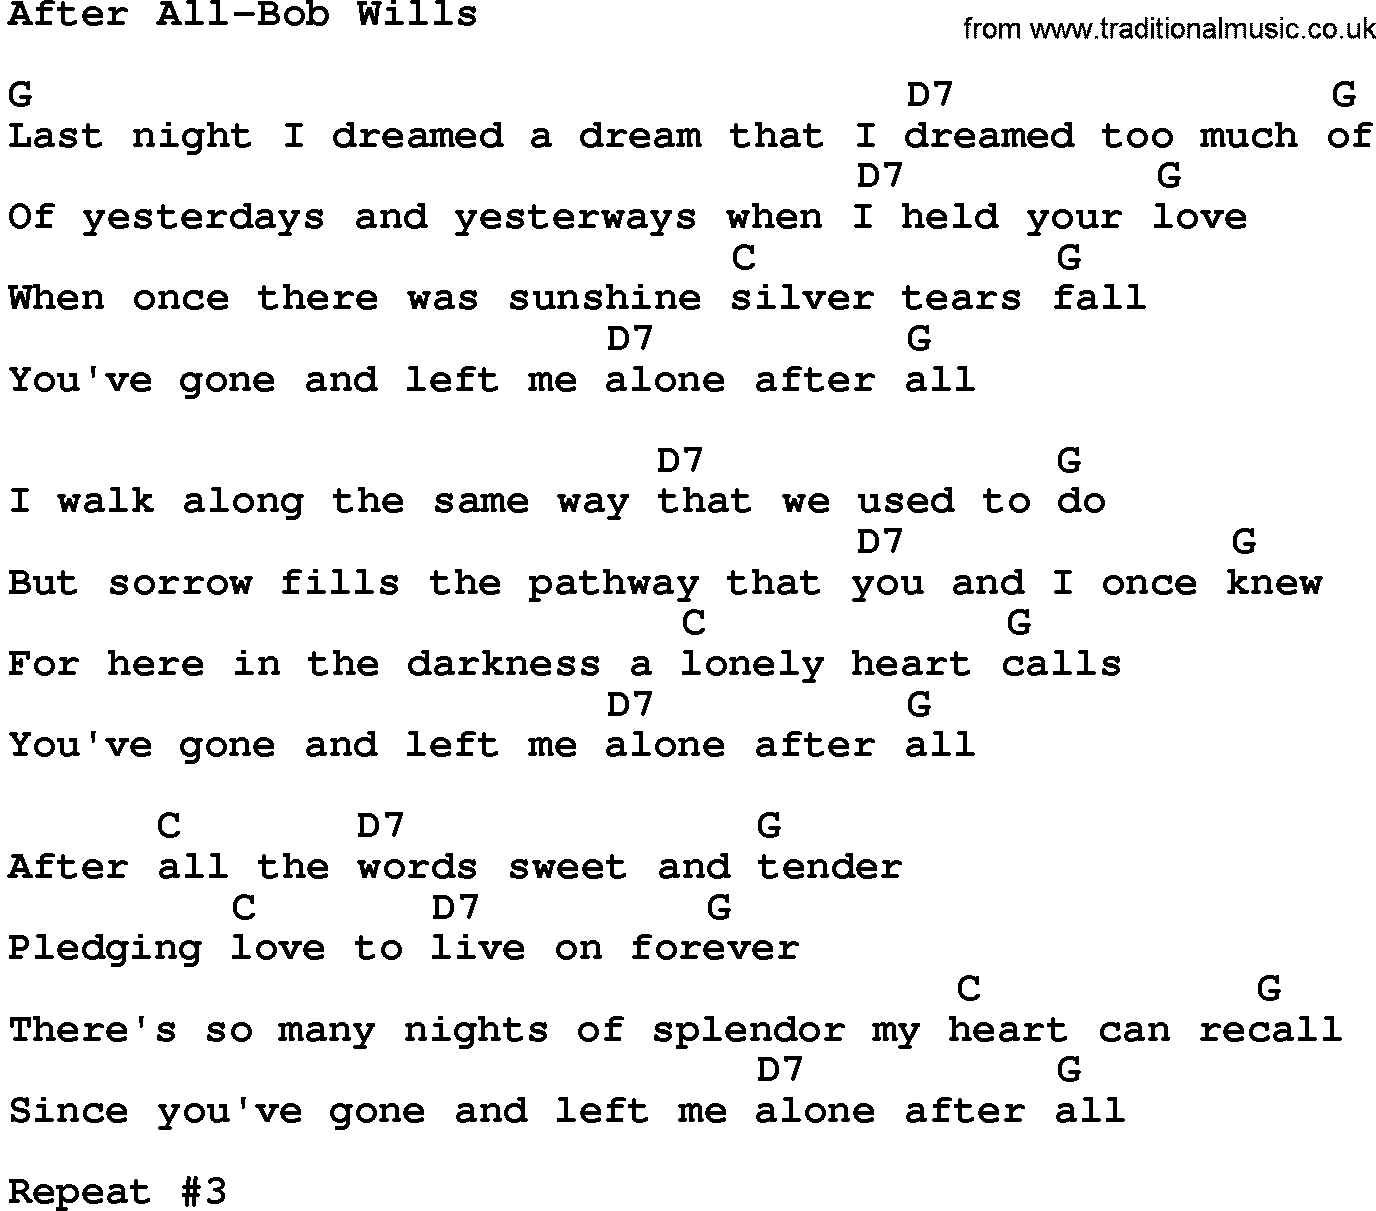 Country music song: After All-Bob Wills lyrics and chords